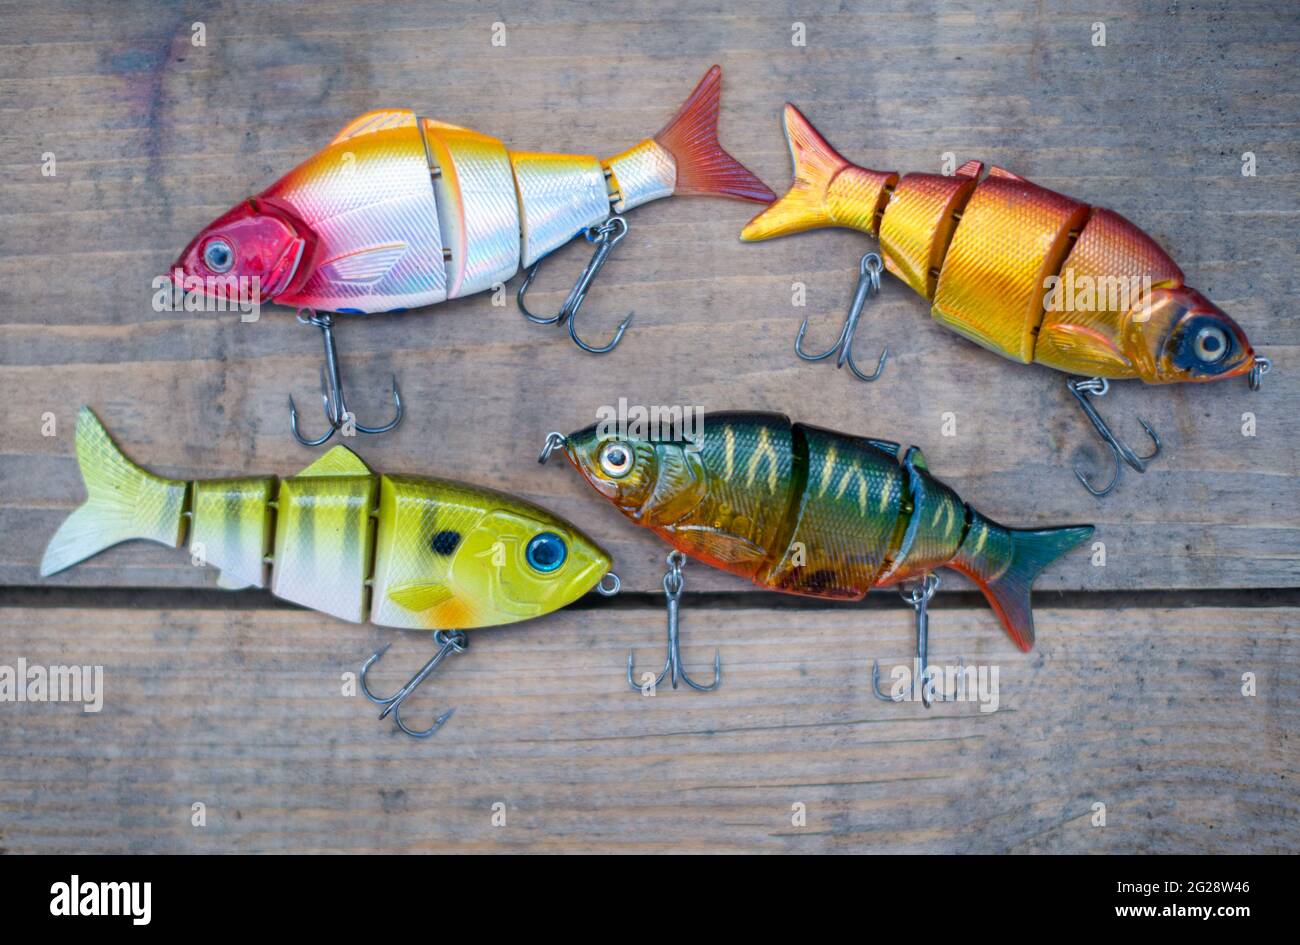 https://c8.alamy.com/comp/2G28W46/fishing-lures-and-tackle-in-the-form-of-bright-fish-sets-of-accessories-for-fishing-2G28W46.jpg